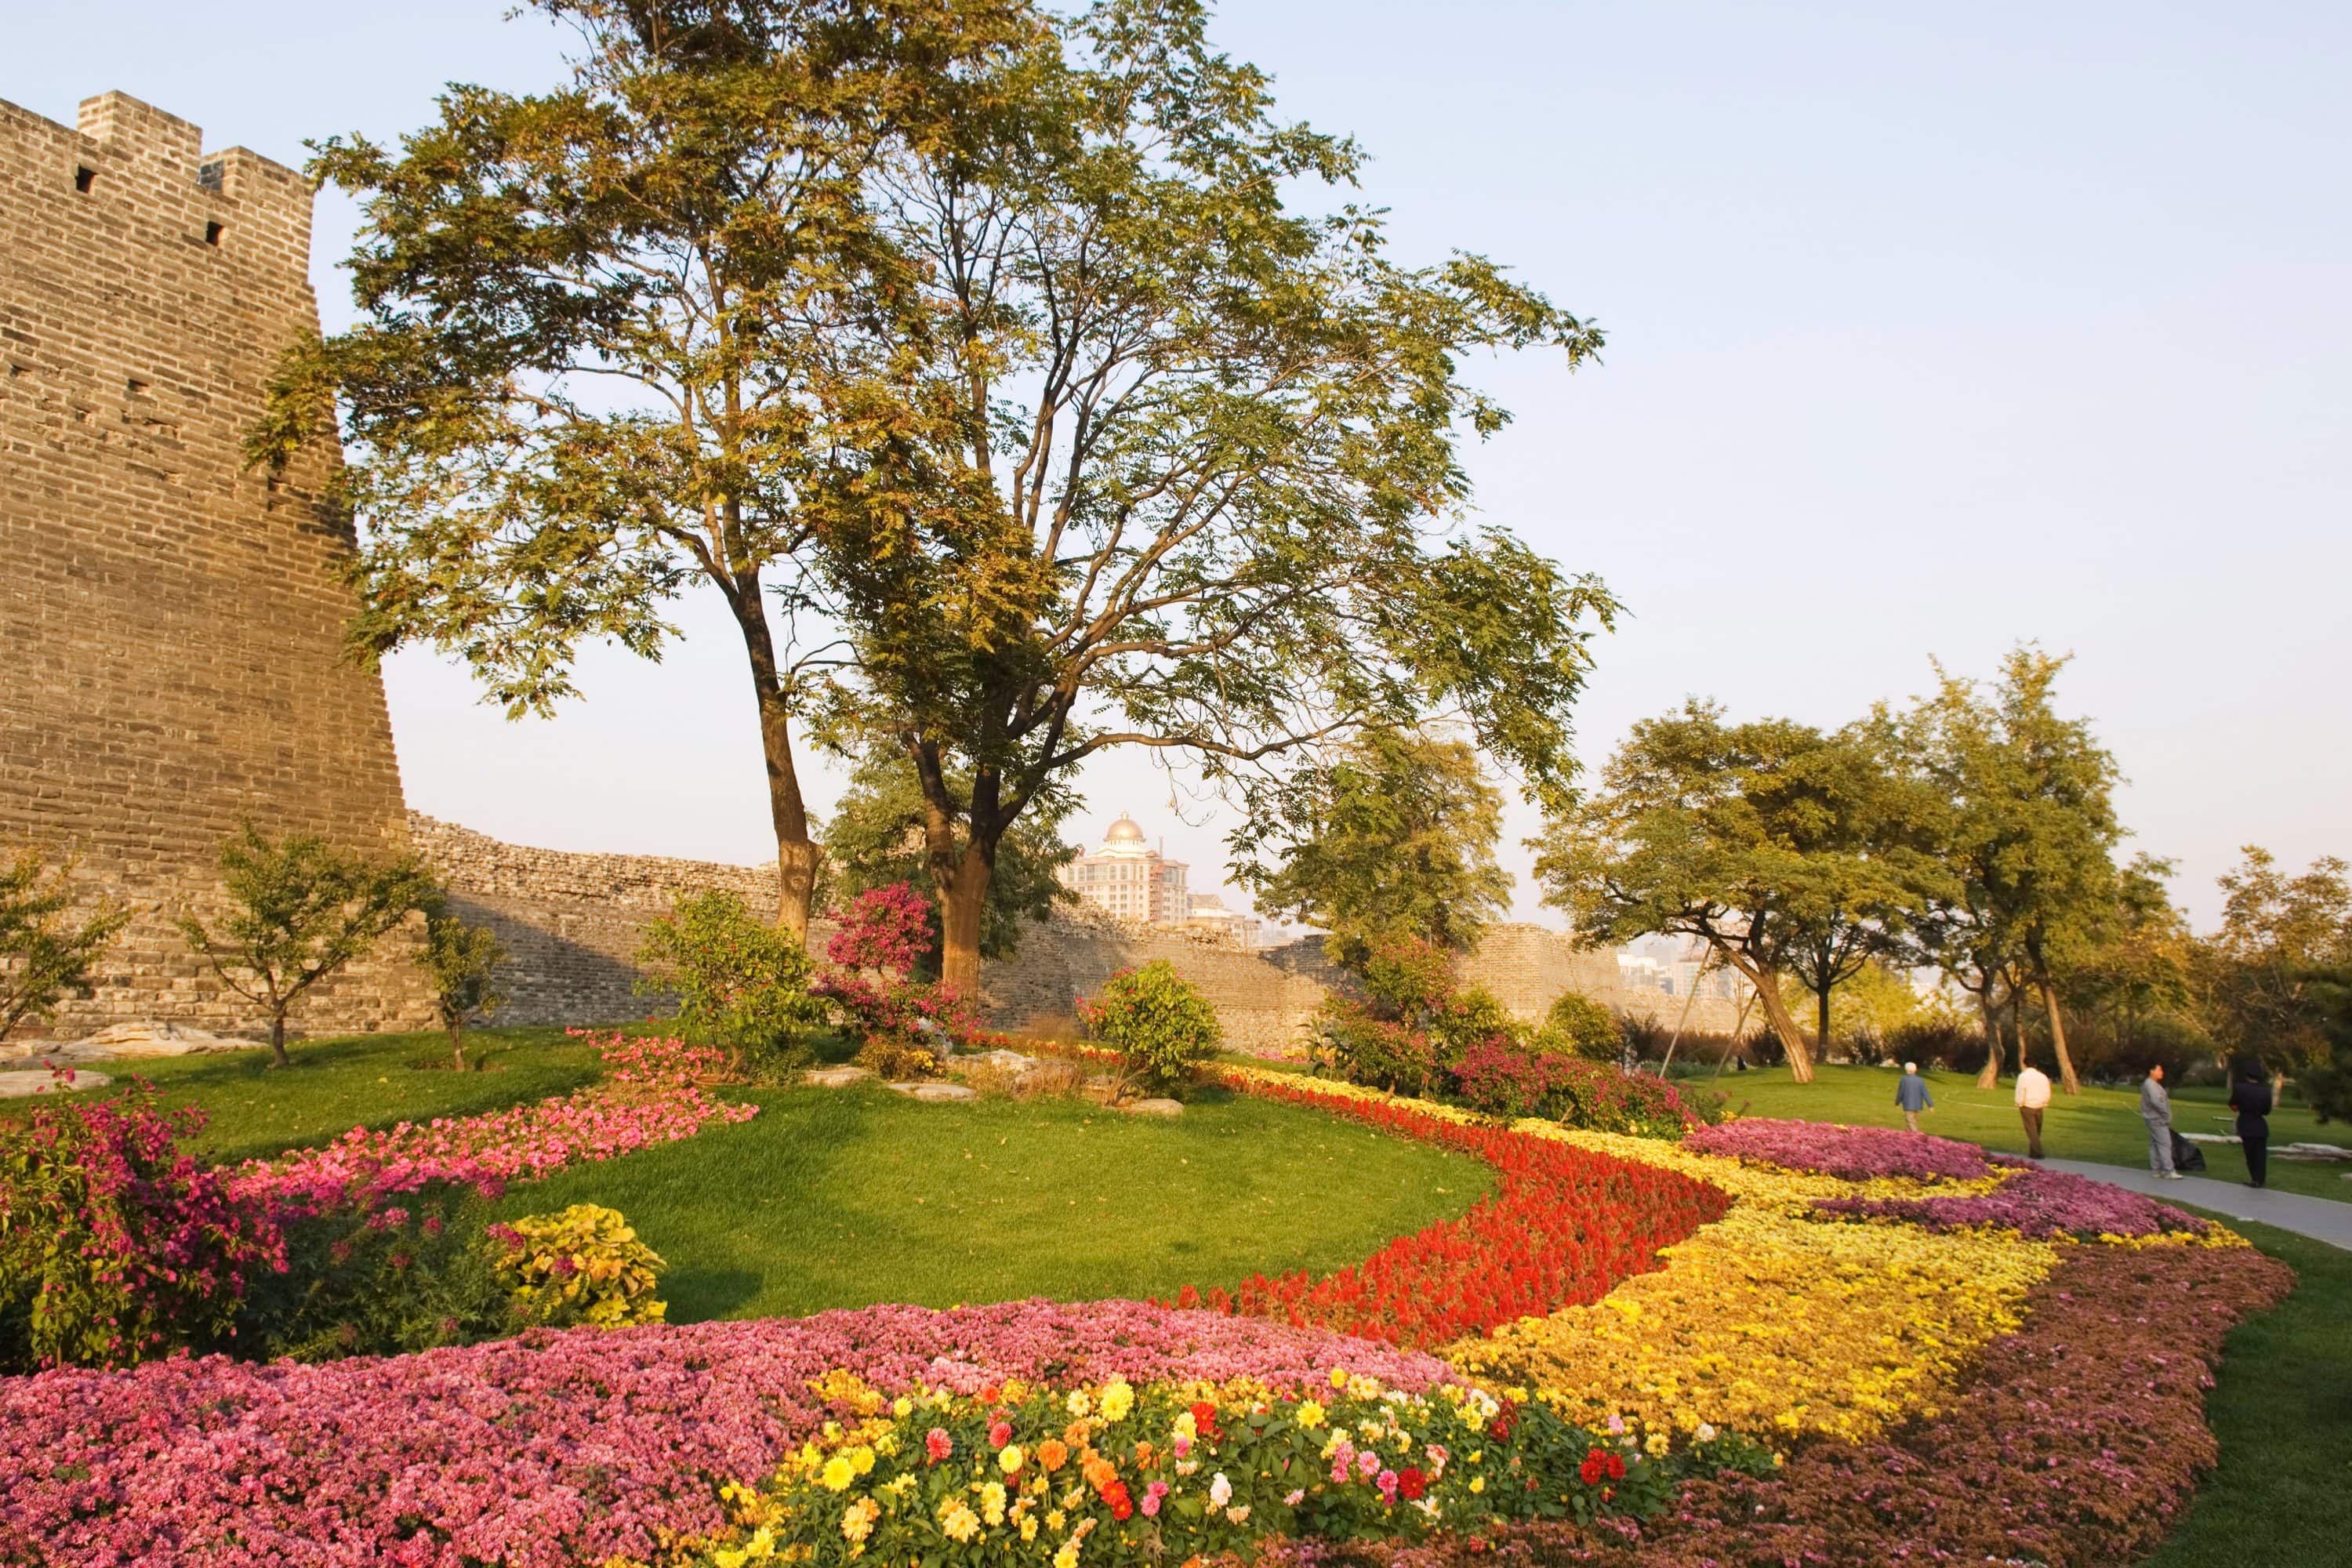 Visitors admire bright flowers in the Ming City Wall Ruins Park